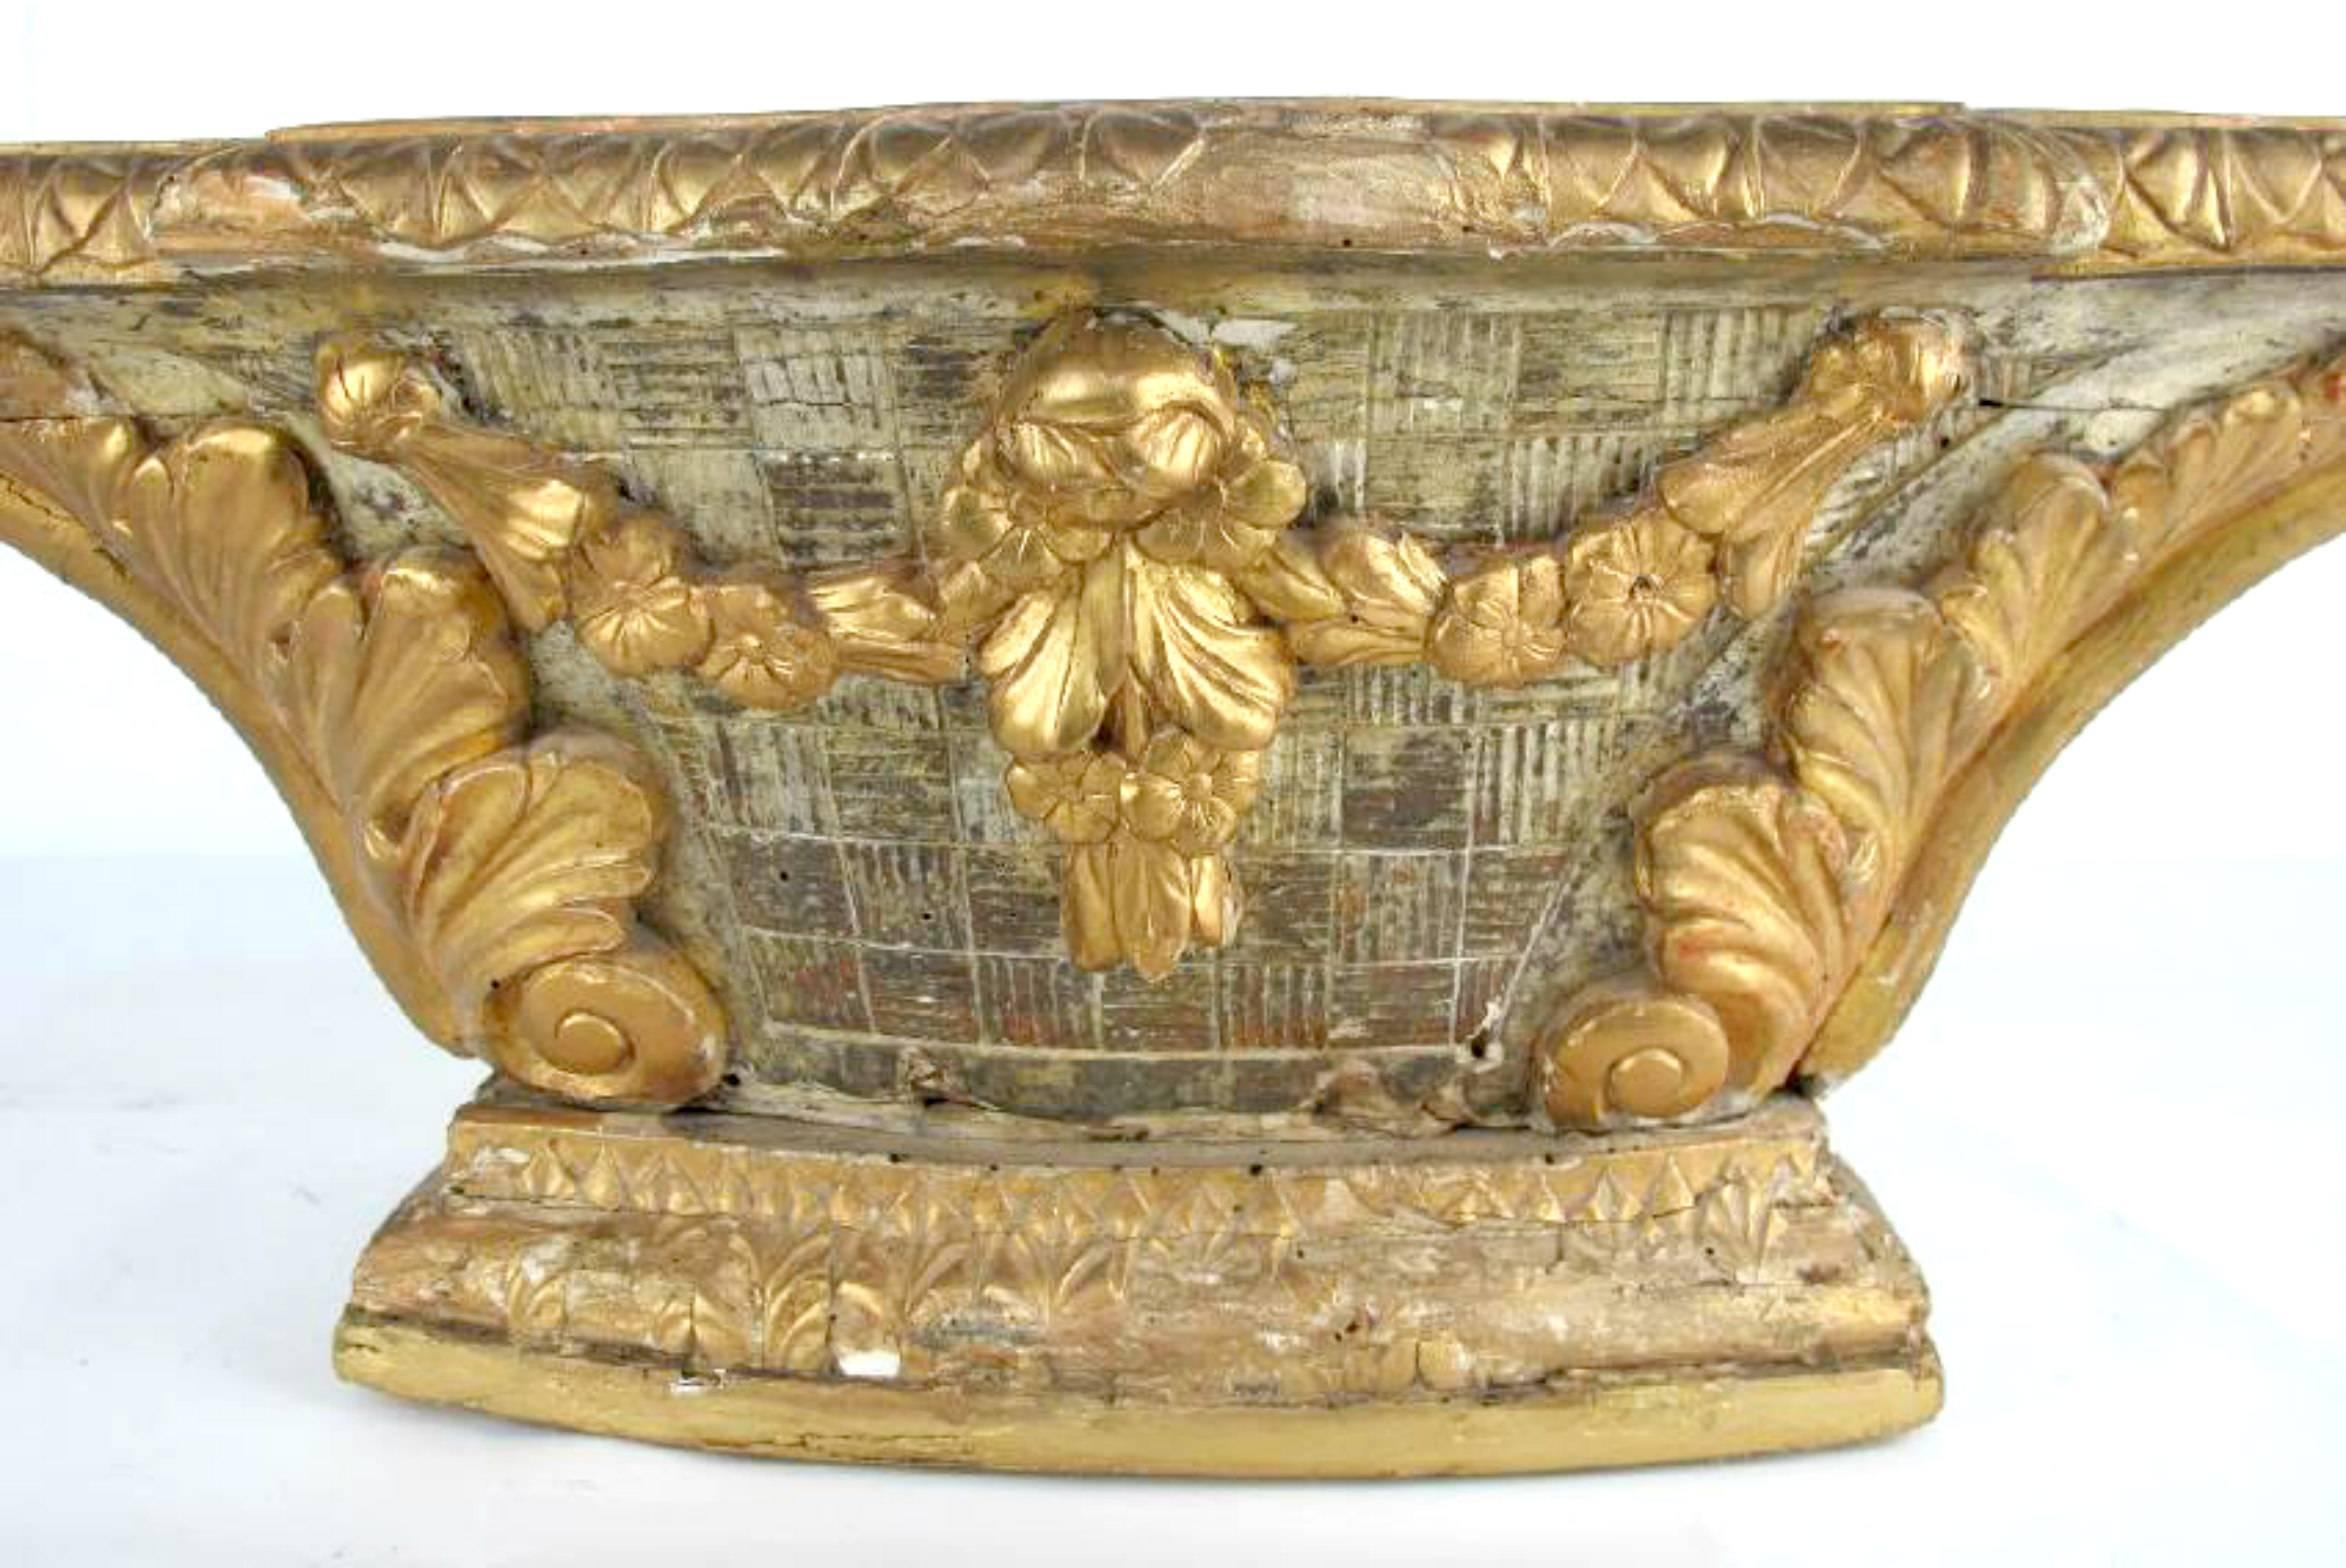 Wonderful 18th century French Louis period XVI carved tabletop giltwood altar pedestal with garland and foliate motifs. Used for the display of a saint or statue, it's wonderful on its own. 

Dimensions: 
Height: 11.25 inches
Width: 30